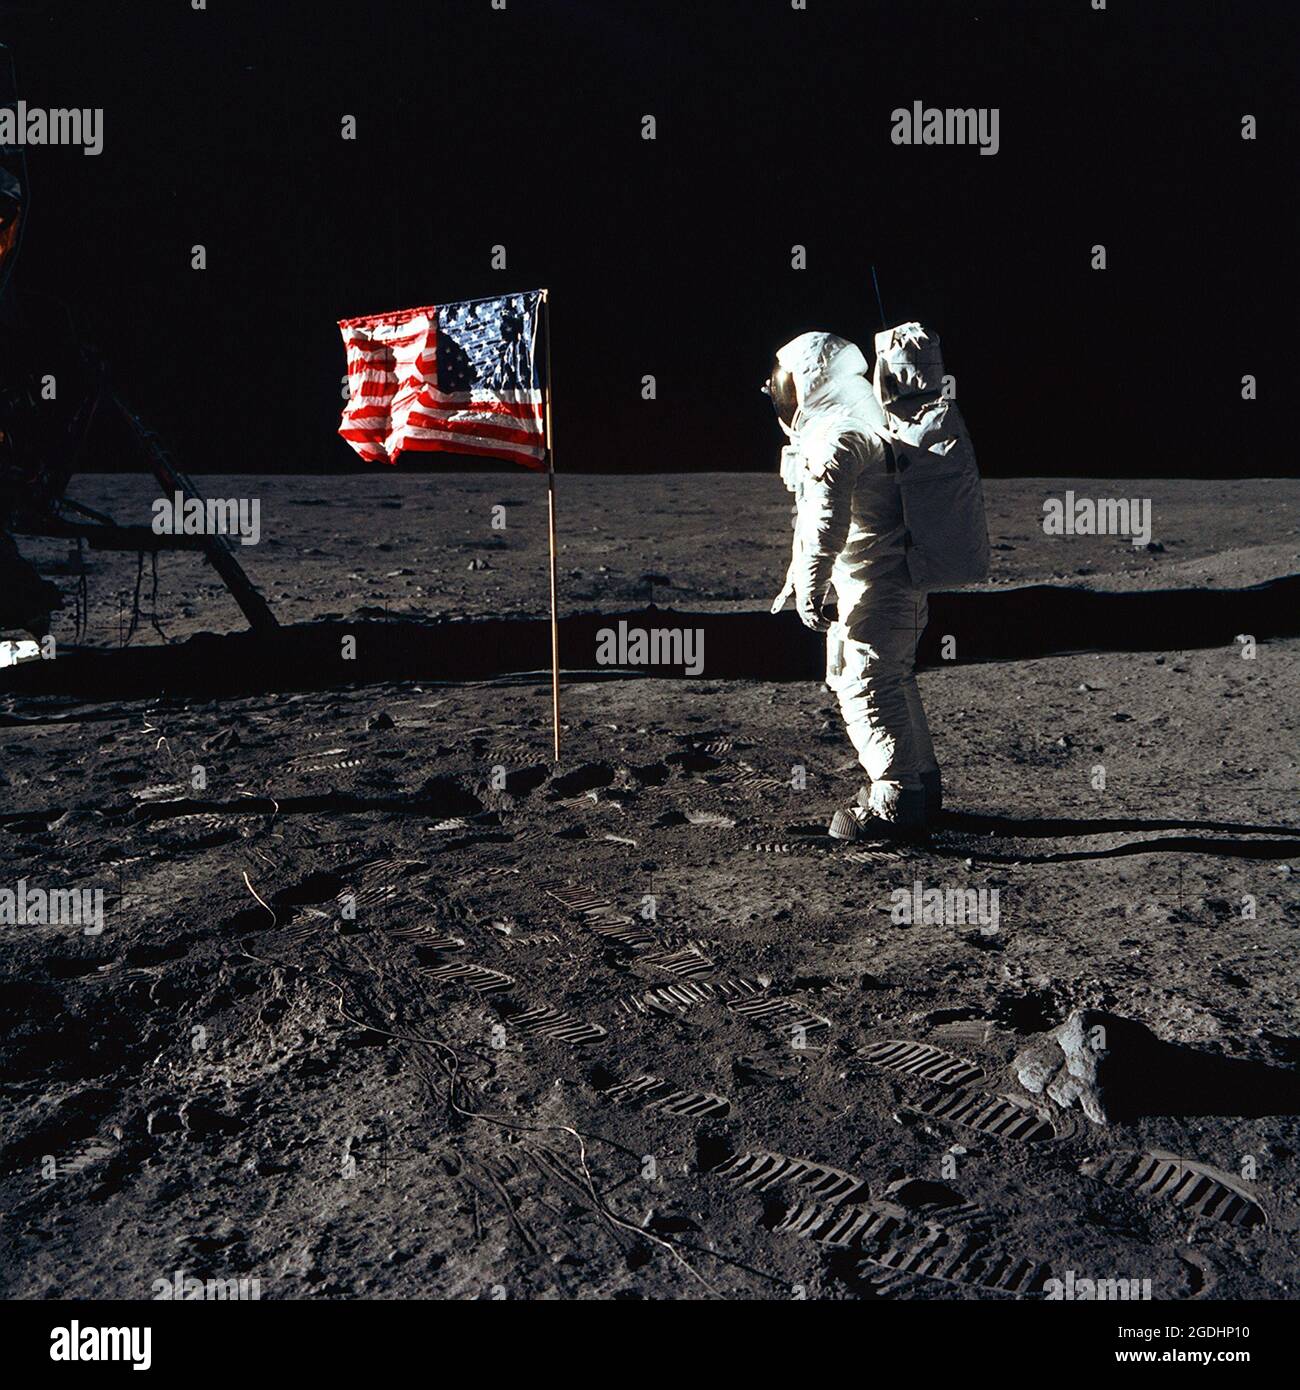 Astronaut Buzz Aldrin, lunar module pilot of the first lunar landing mission Apollo 11, on the surface of the moon. Stock Photo